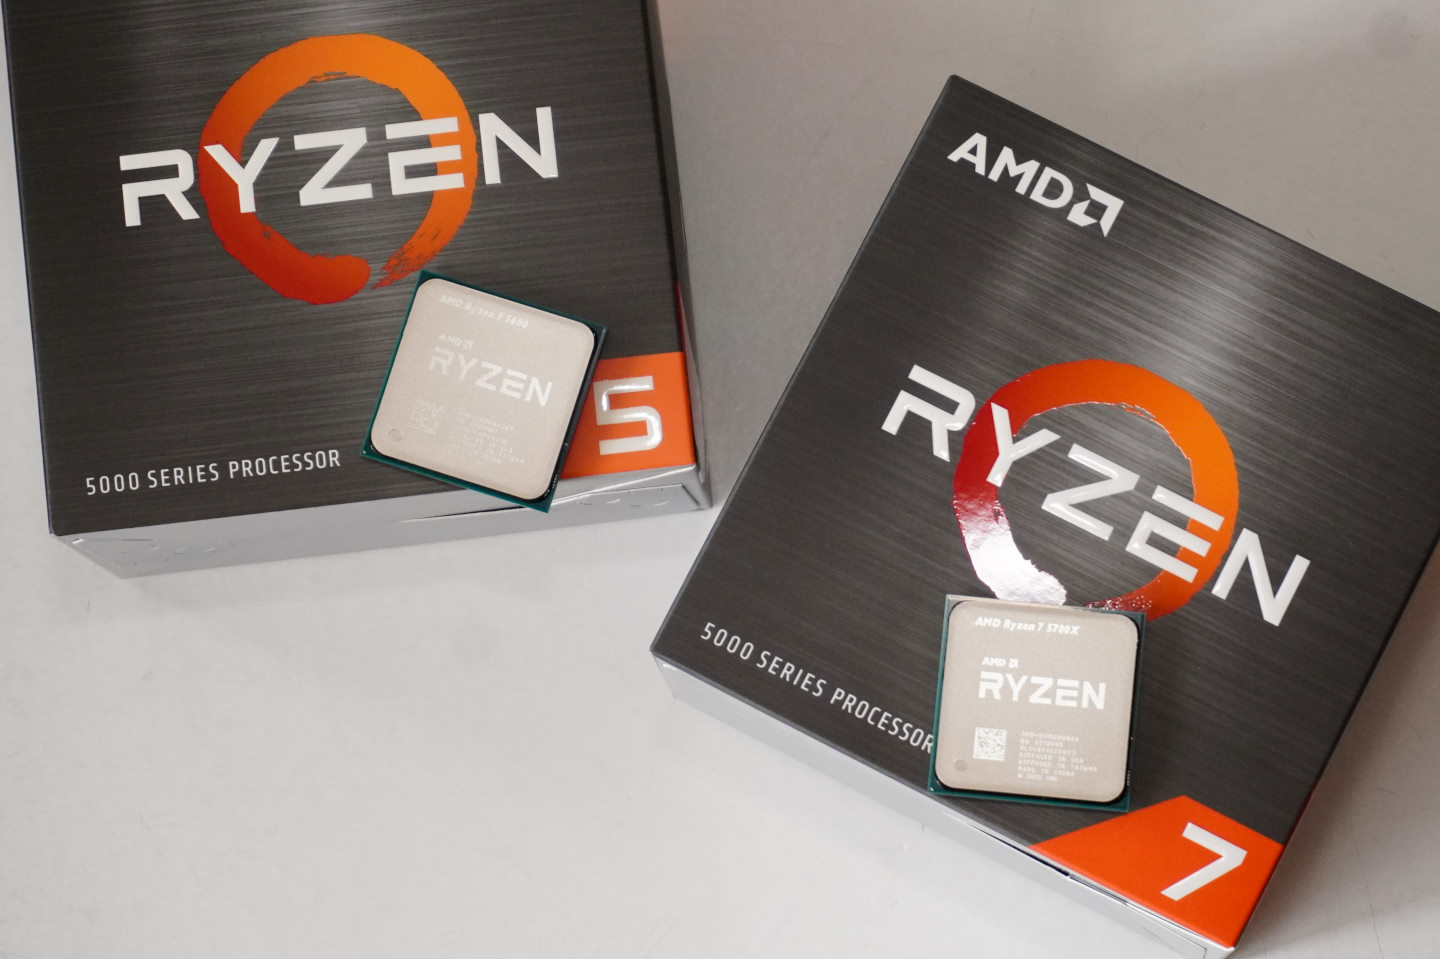 The test samples this time are 2 processors such as Ryzen 5 5600 and Ryzen 7 5700X.